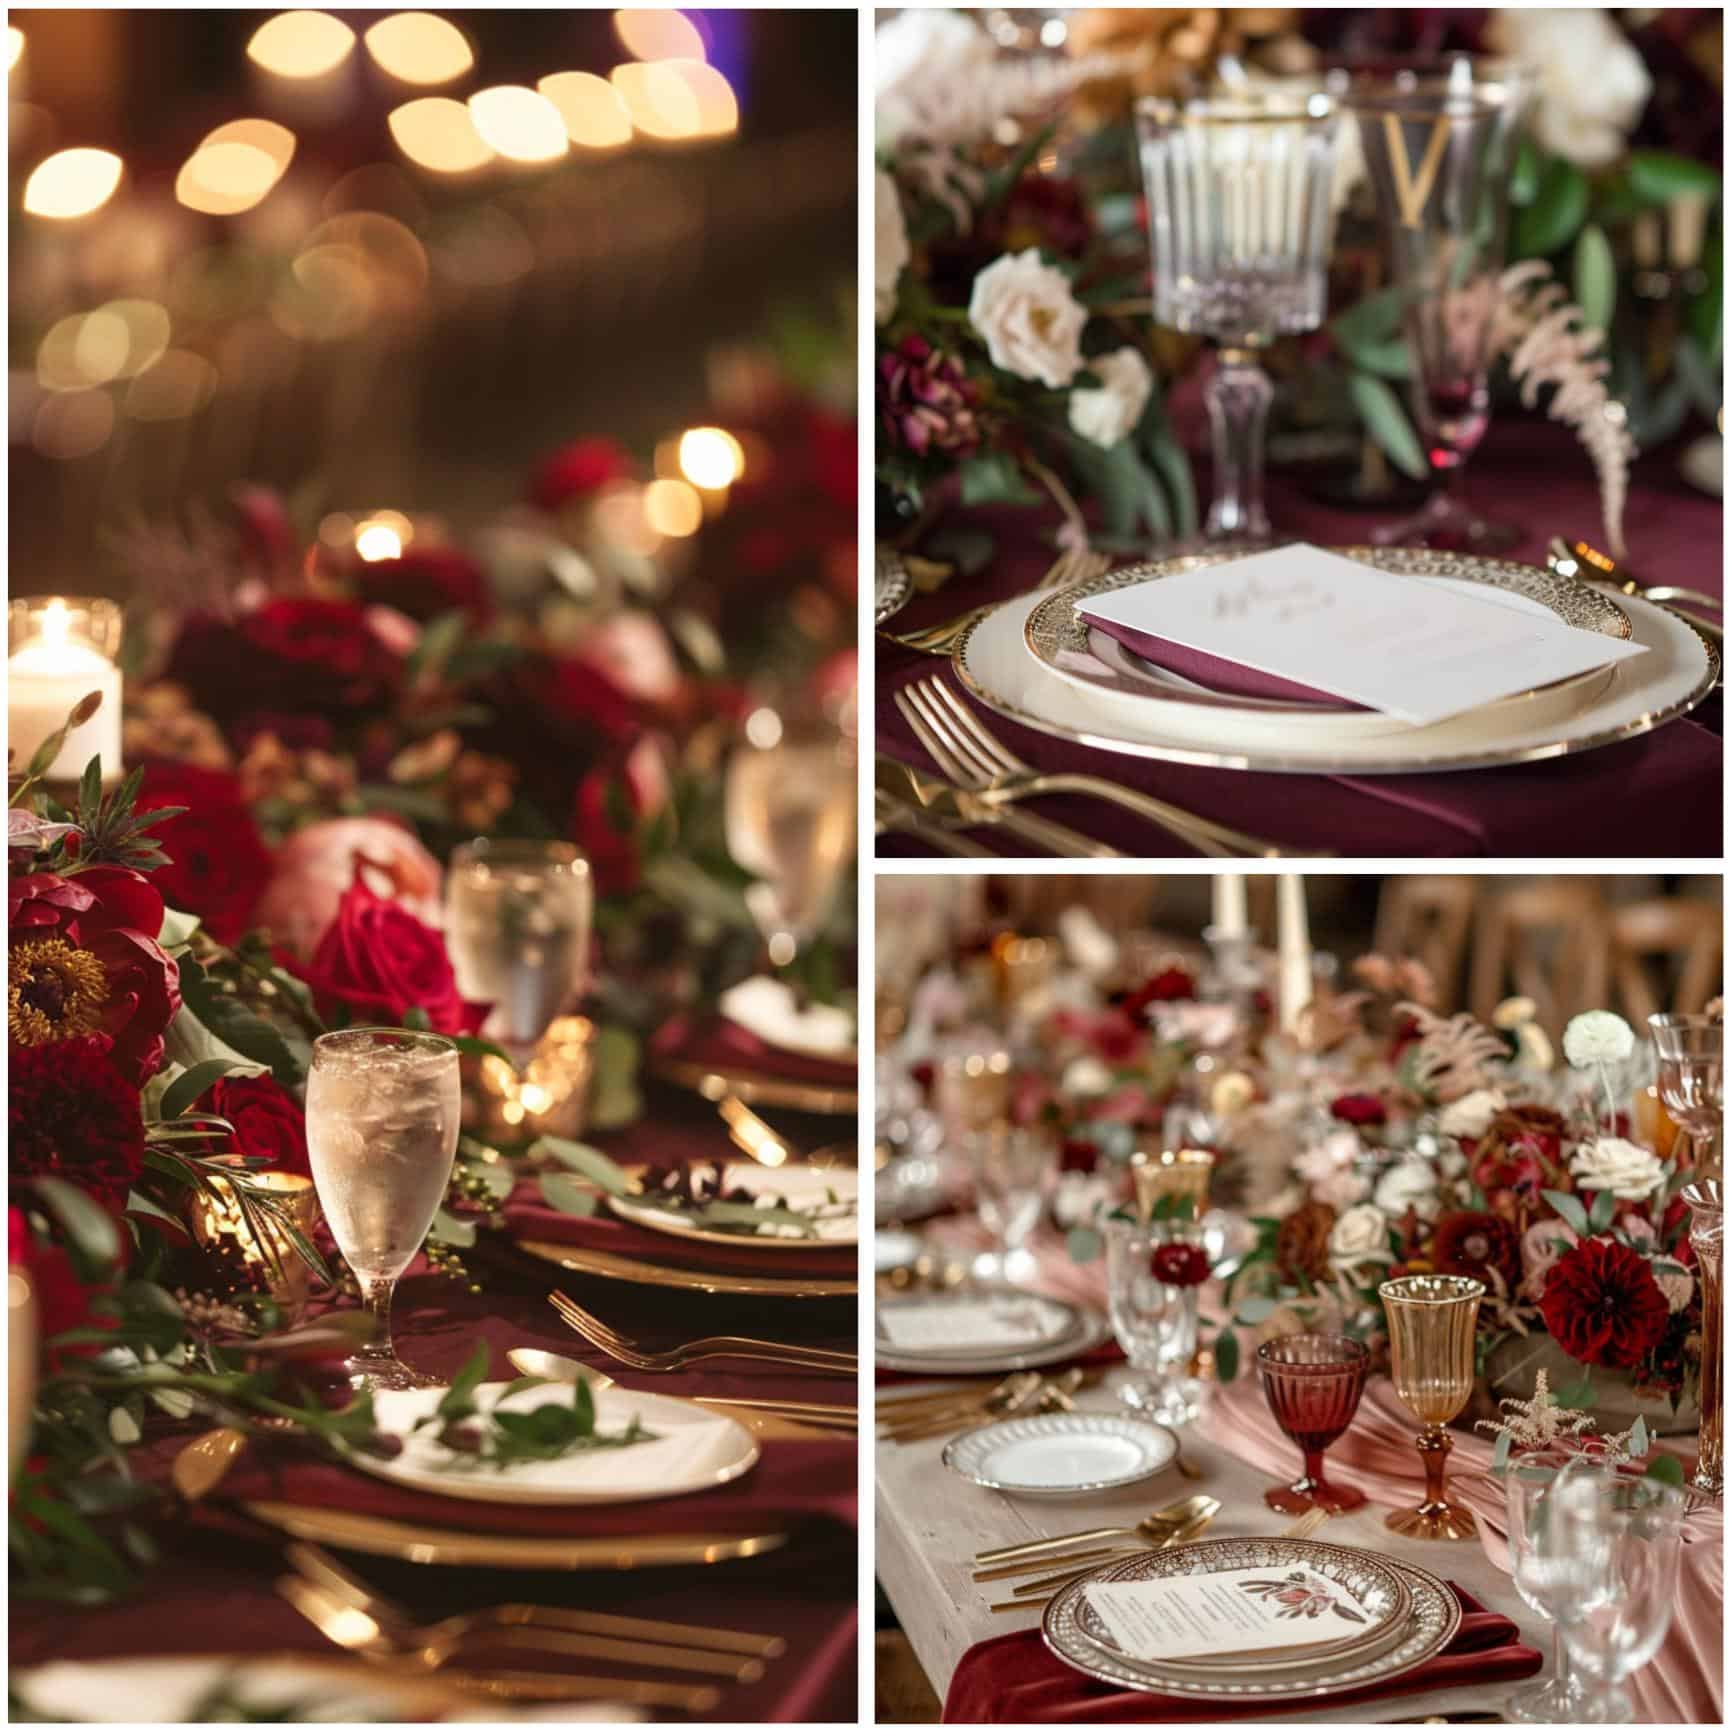 table settings for a maroon-themed wedding reception